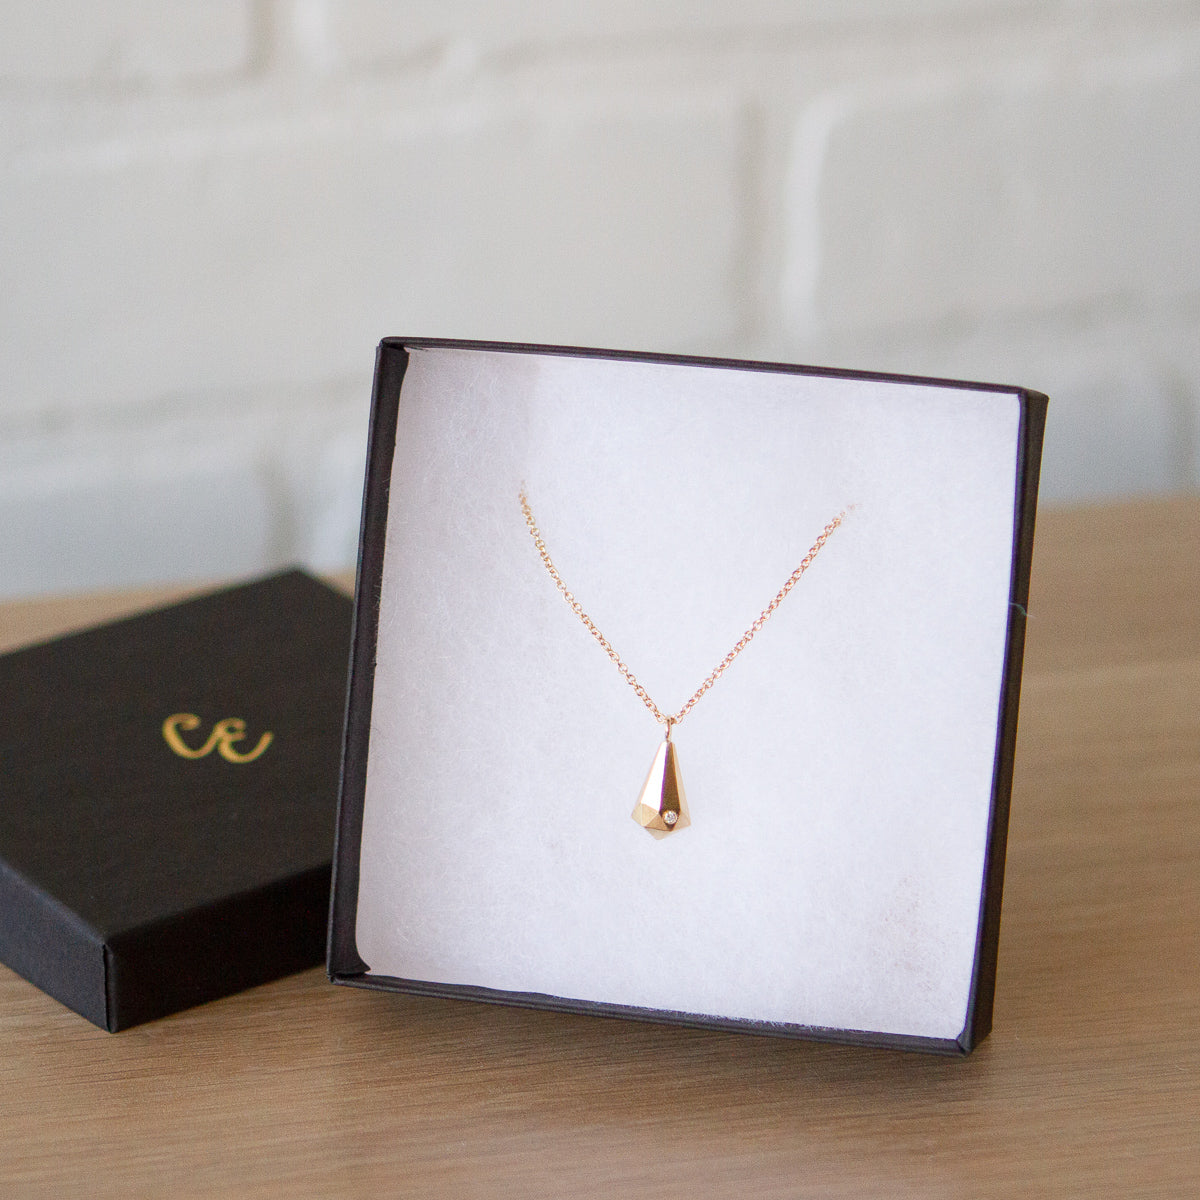 Vermeil and Diamond Crystal Fragment Necklace in a gift box